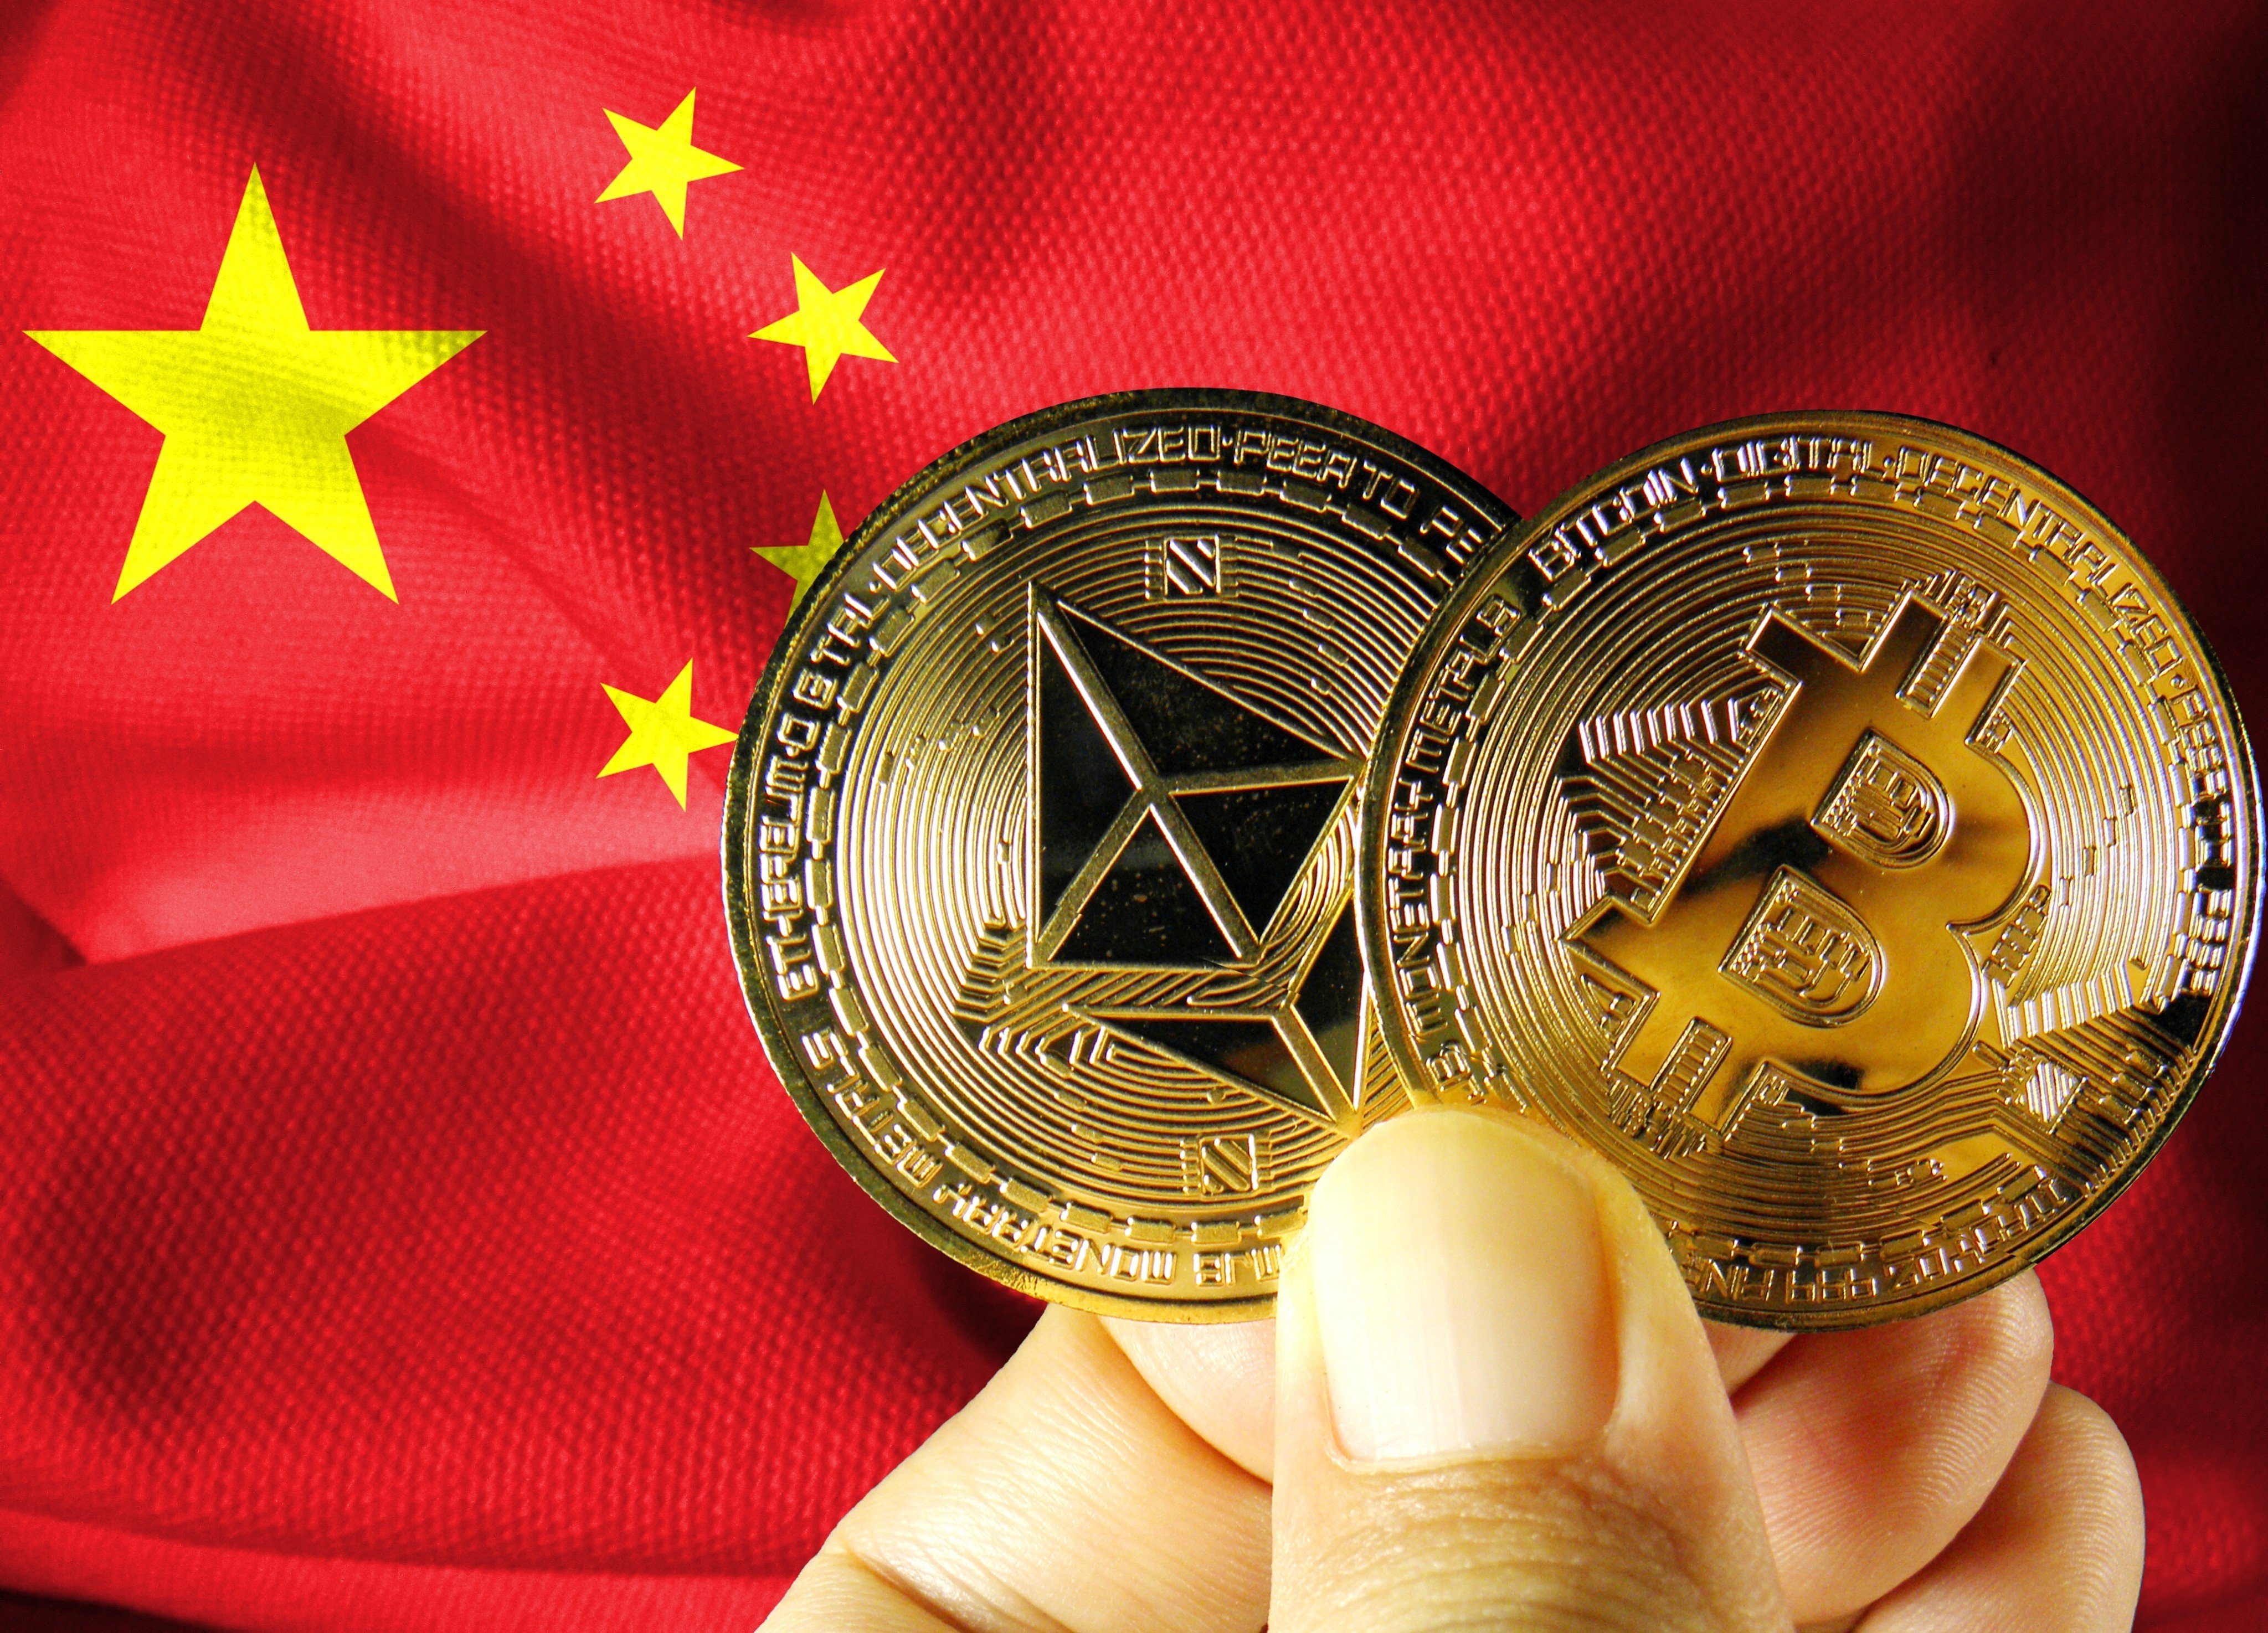 Cryptocurrency trading via a number of major exchanges has remained active in mainland China, as local enthusiasts employ a range of workarounds. Photo: Shutterstock